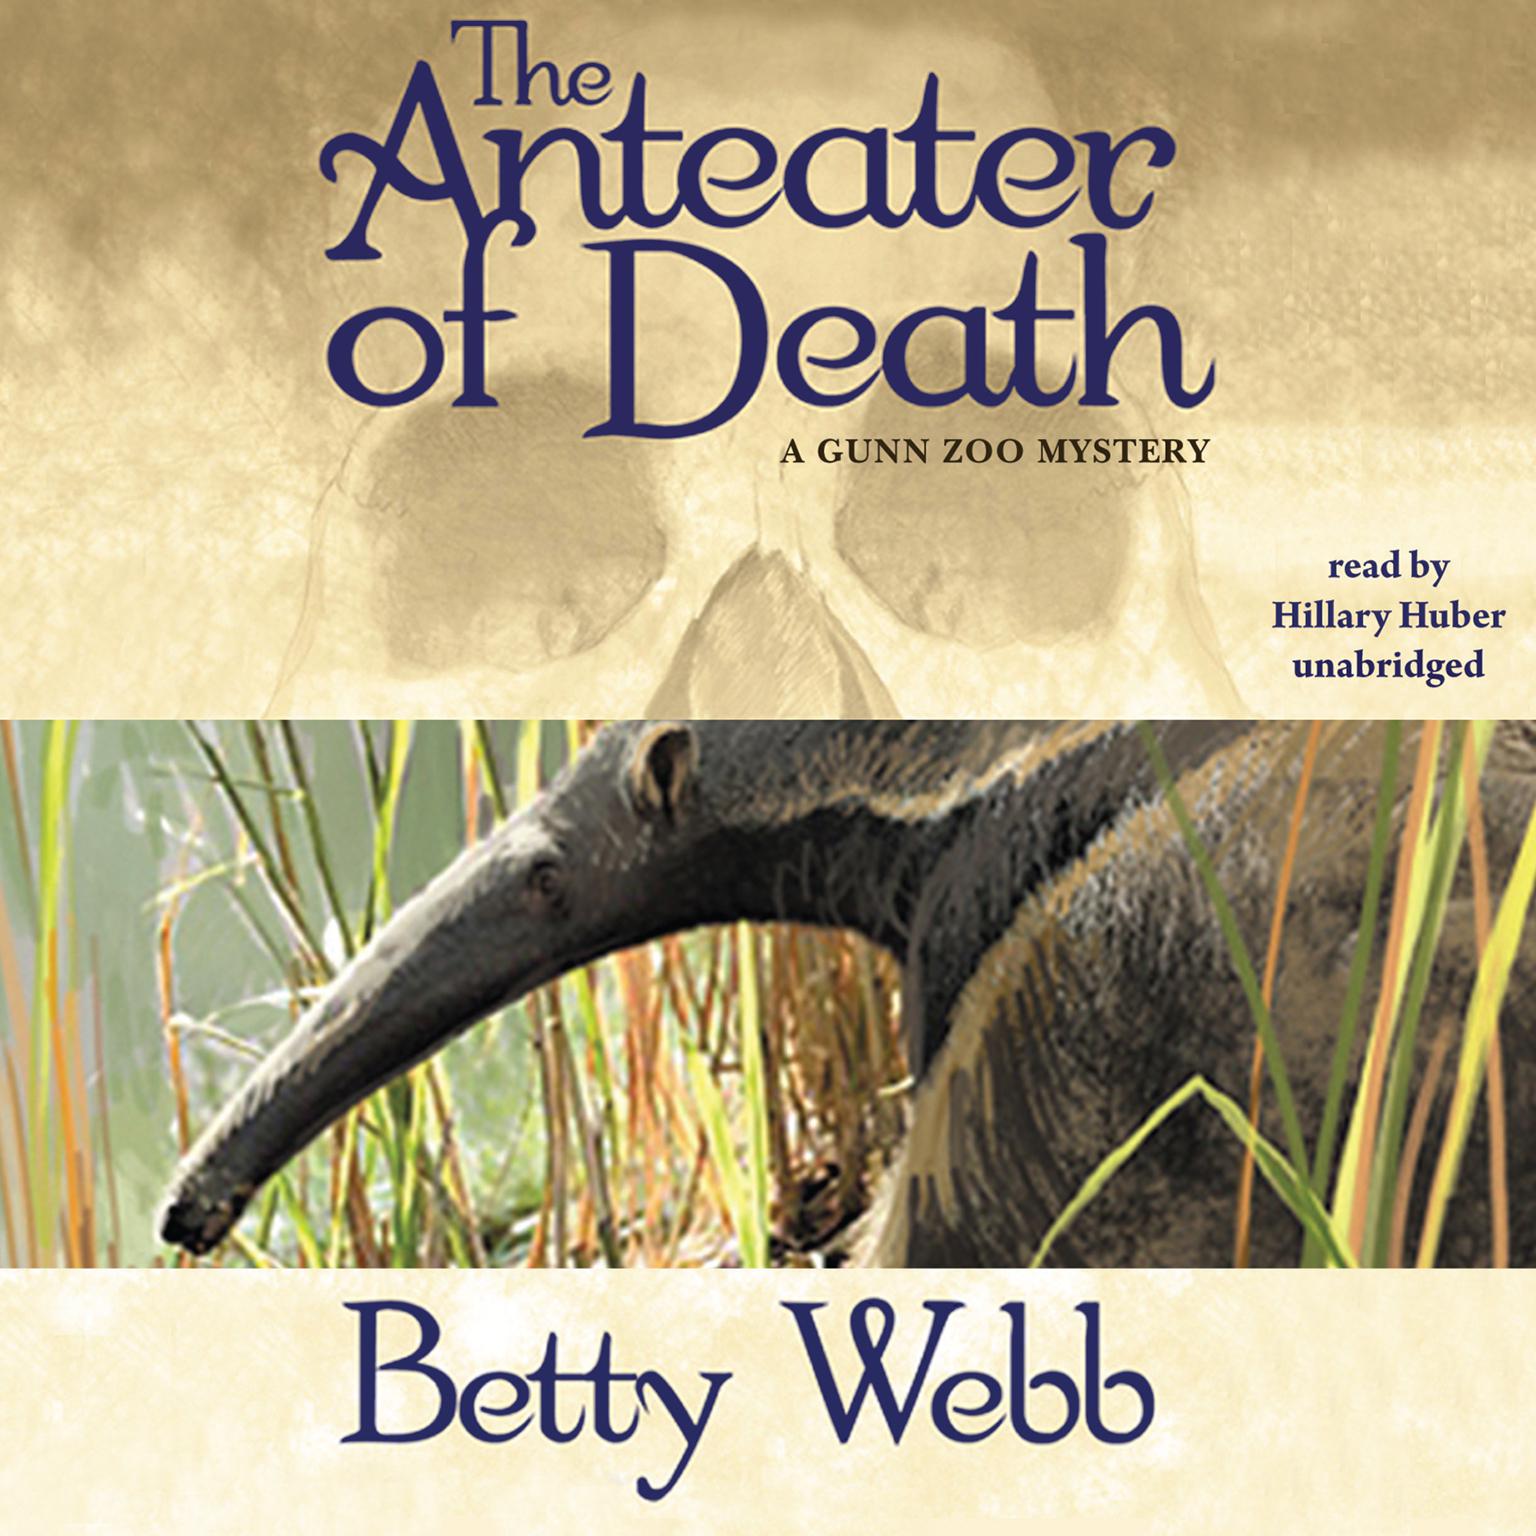 The Anteater of Death: A Gunn Zoo Mystery Audiobook, by Betty Webb